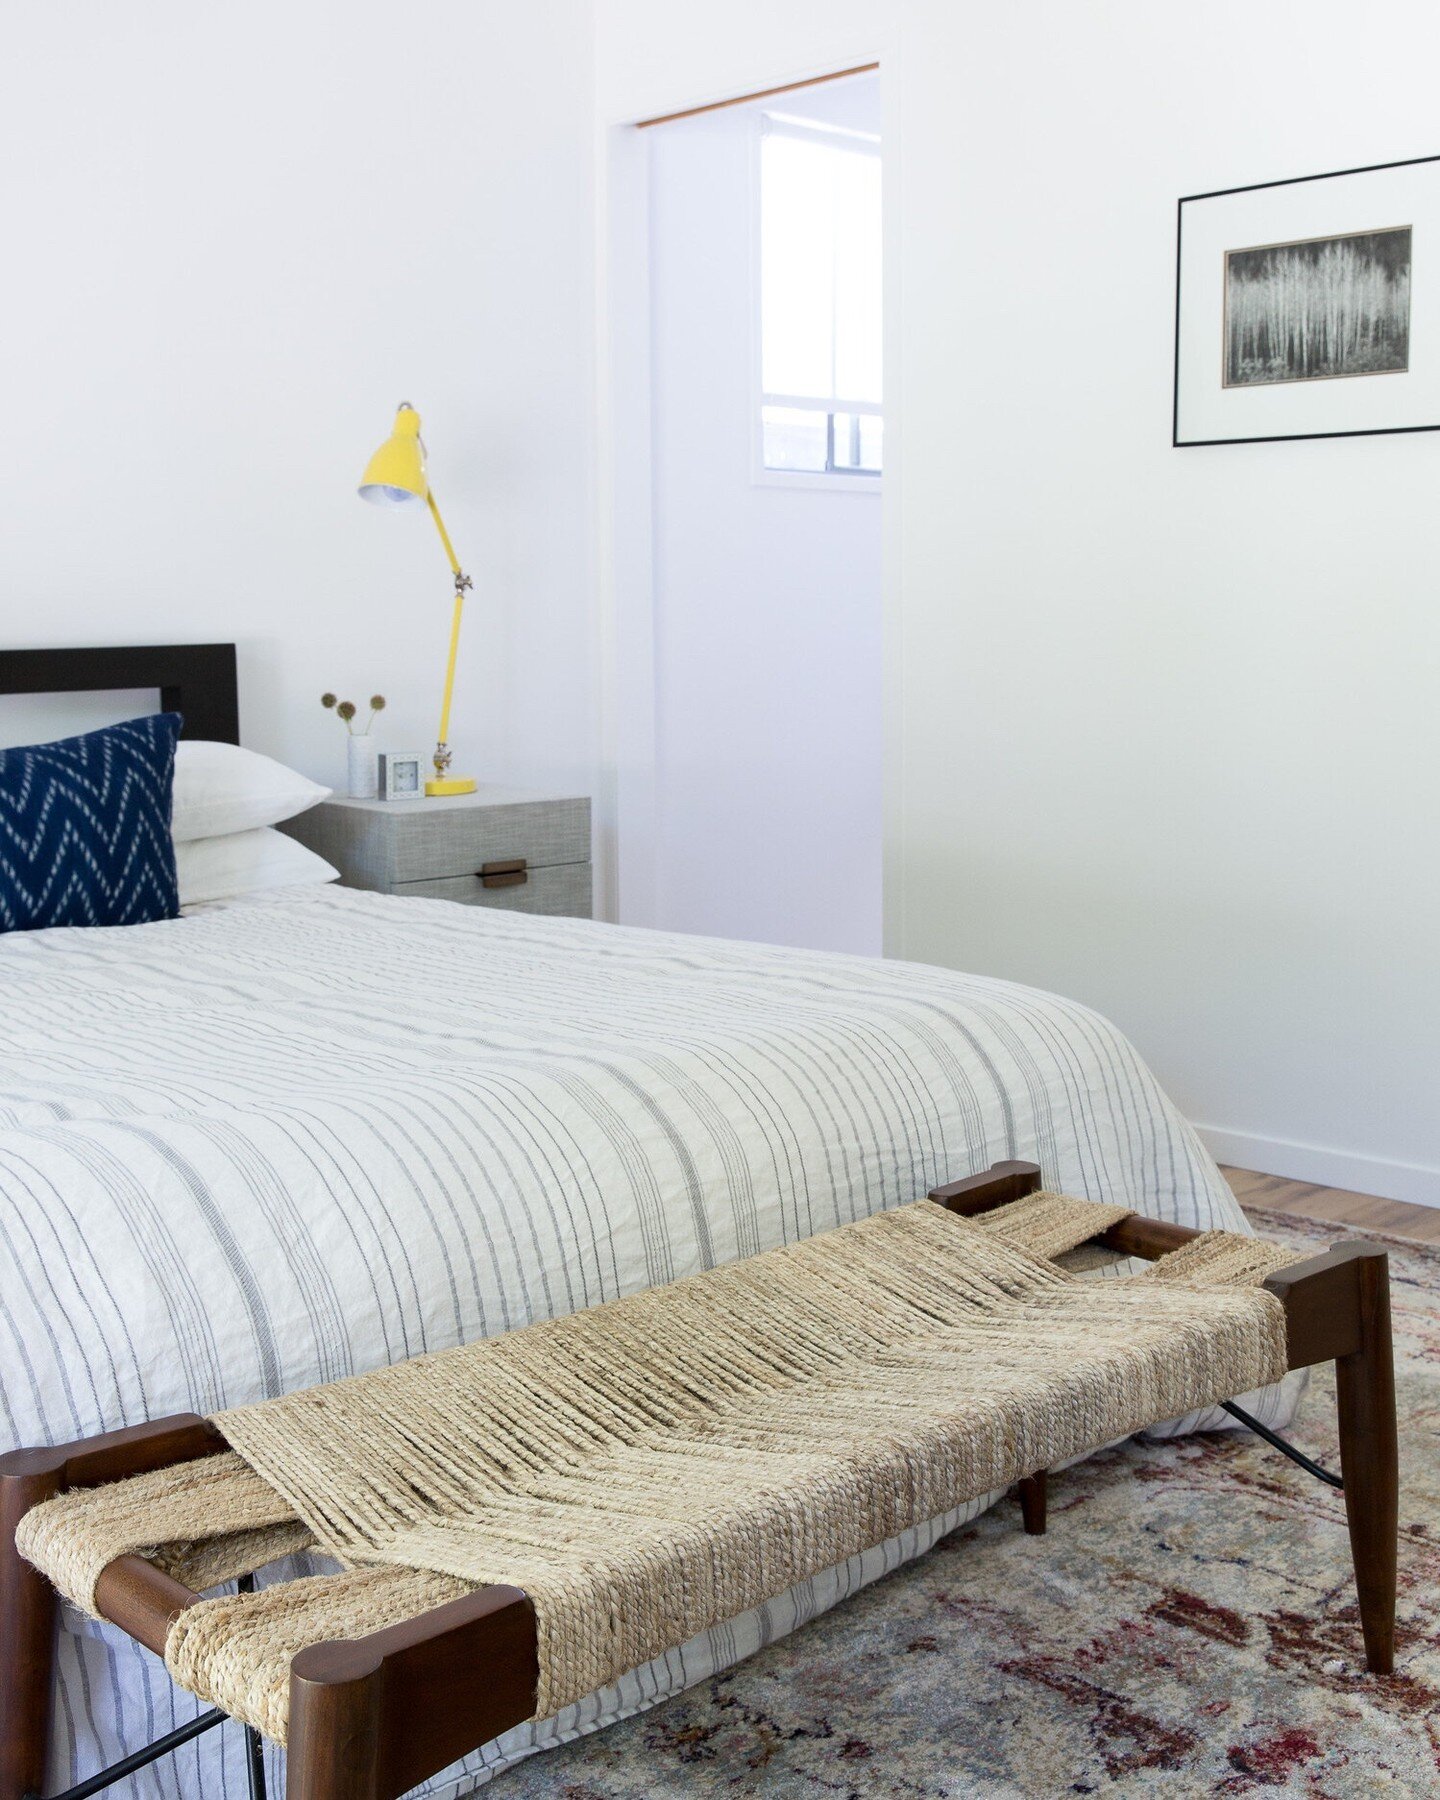 This woven footboard bench by @cb2 in our #SanRafaelMidCenturyModern project is the perfect touch of natural fibre to this midcentury bedroom.

Photography Credit: @meghancaudill